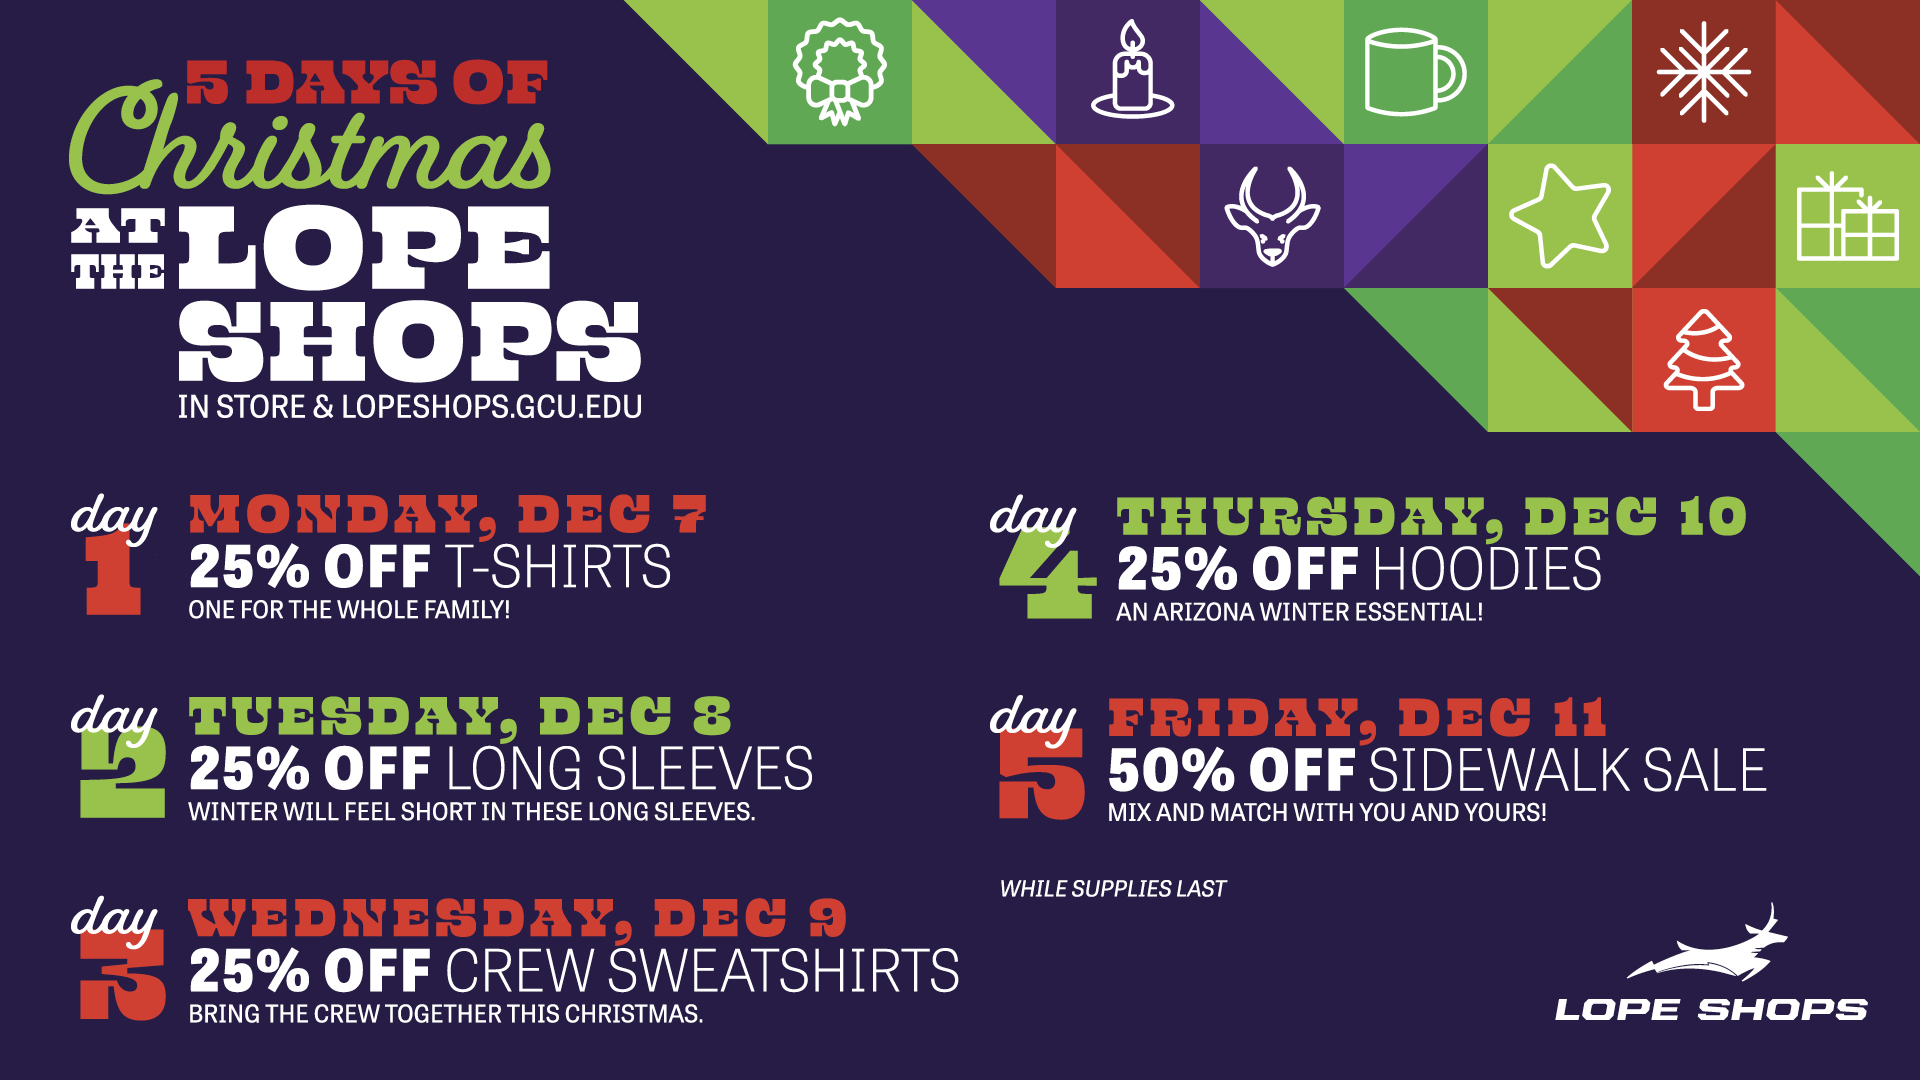 featured image five:Five Days of Christmas at the Lopes Shops